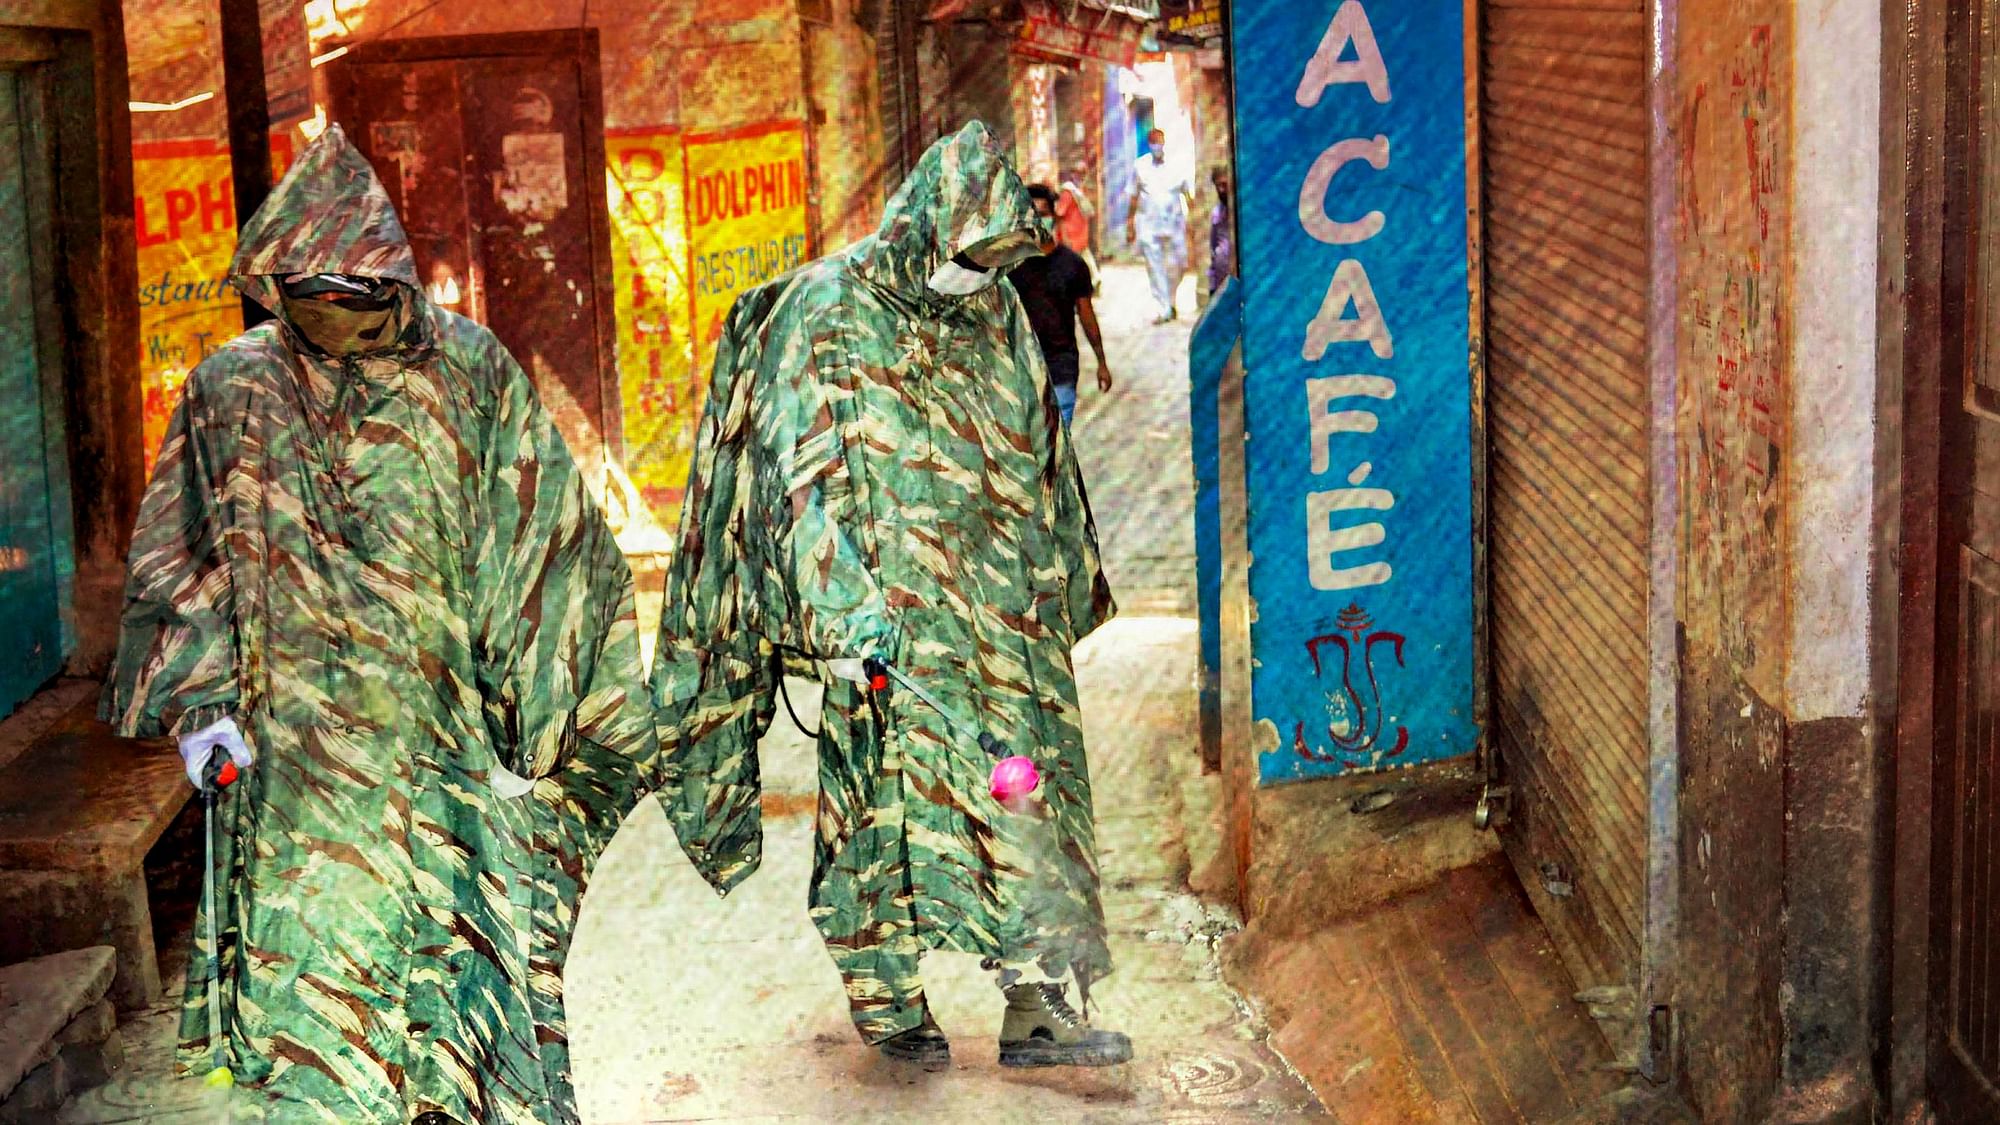 CRPF personnel wearing protective outfits sanitize a street near Dasaswamedh Ghat during ongoing COVID-19 lockdown in Varanasi, Tuesday, 21 April, 2020. Image used for representation.